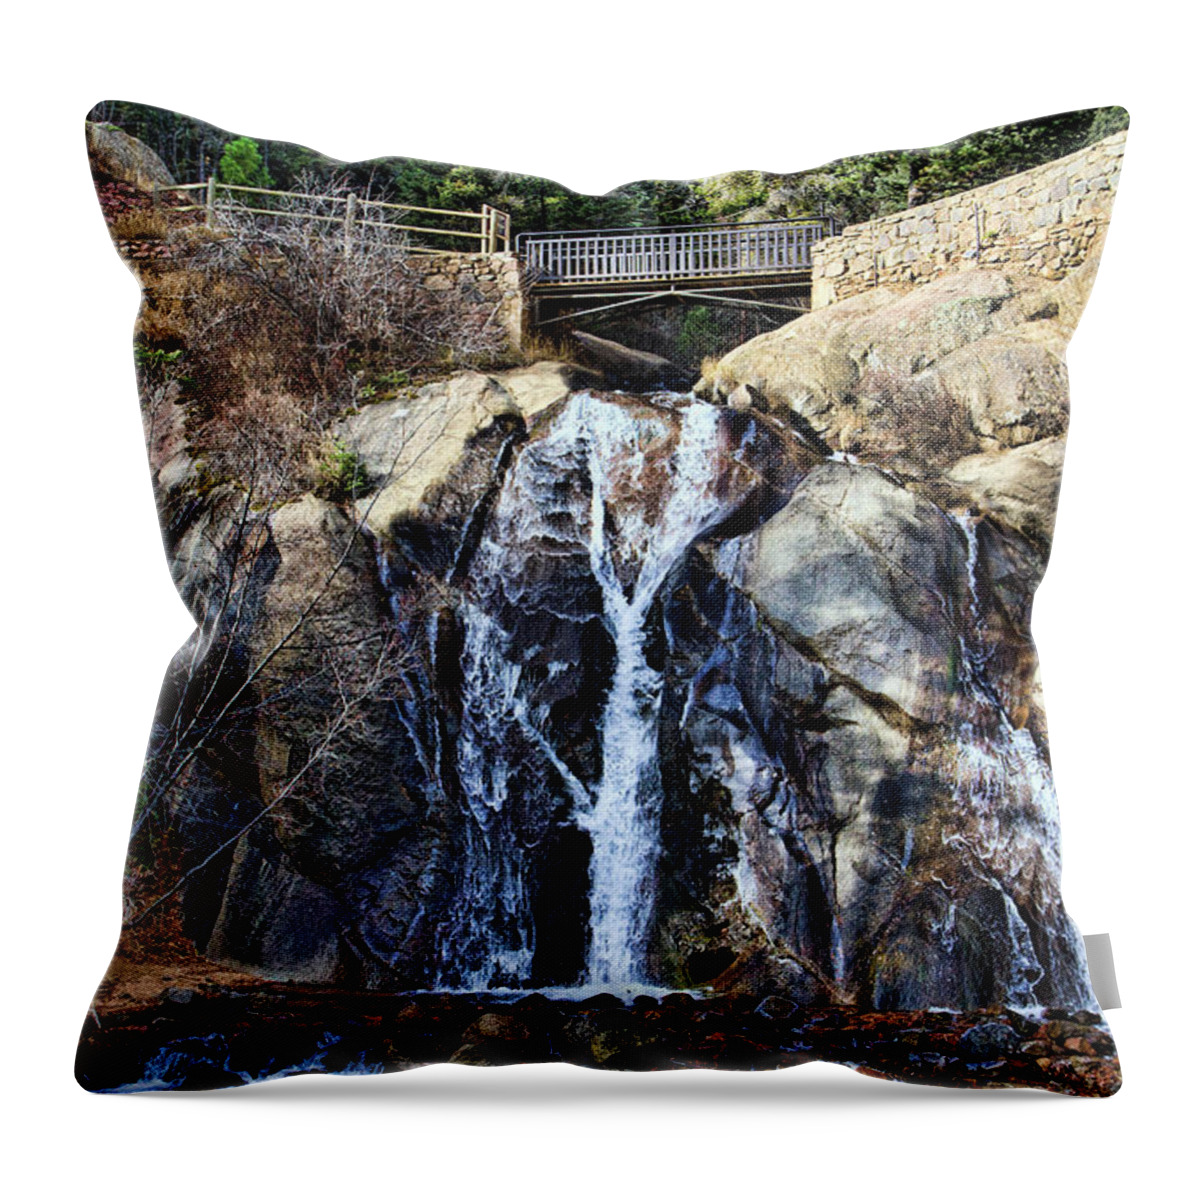 Waterfall Throw Pillow featuring the photograph Helen Hunt Falls by Alana Thrower